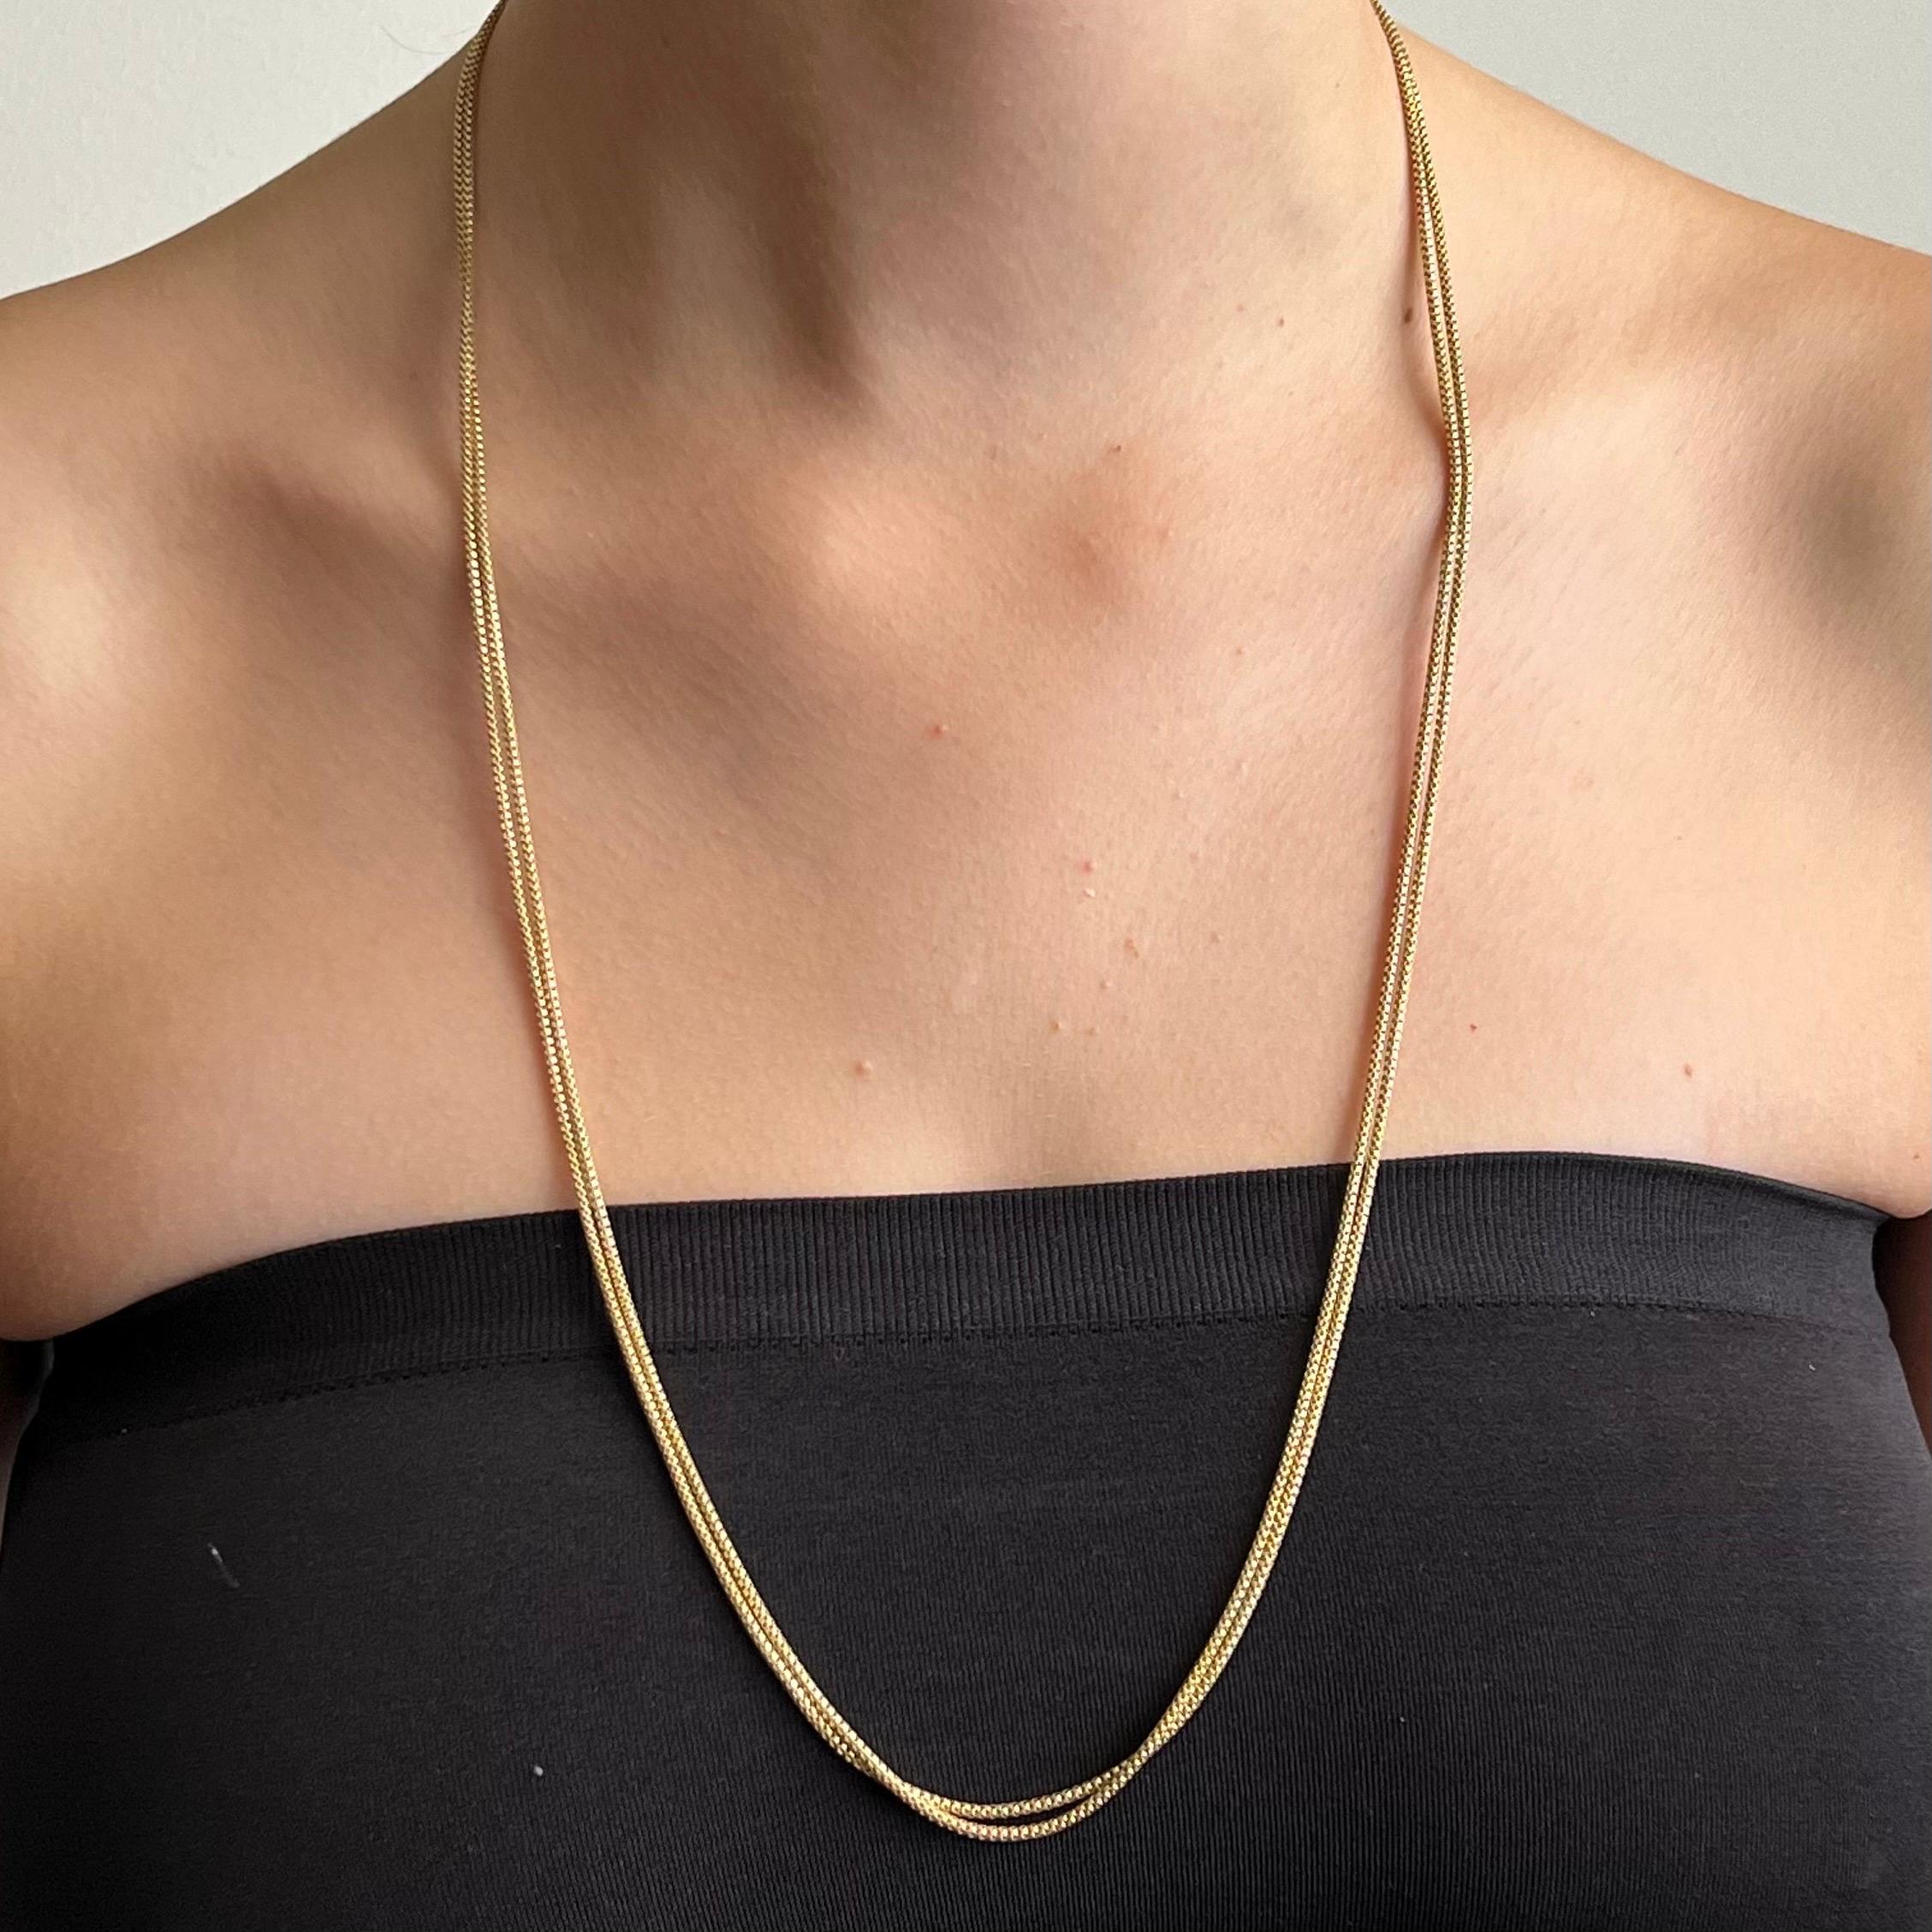 A sautoir box chain necklace made of 14 karat gold. The box chain is also called a 